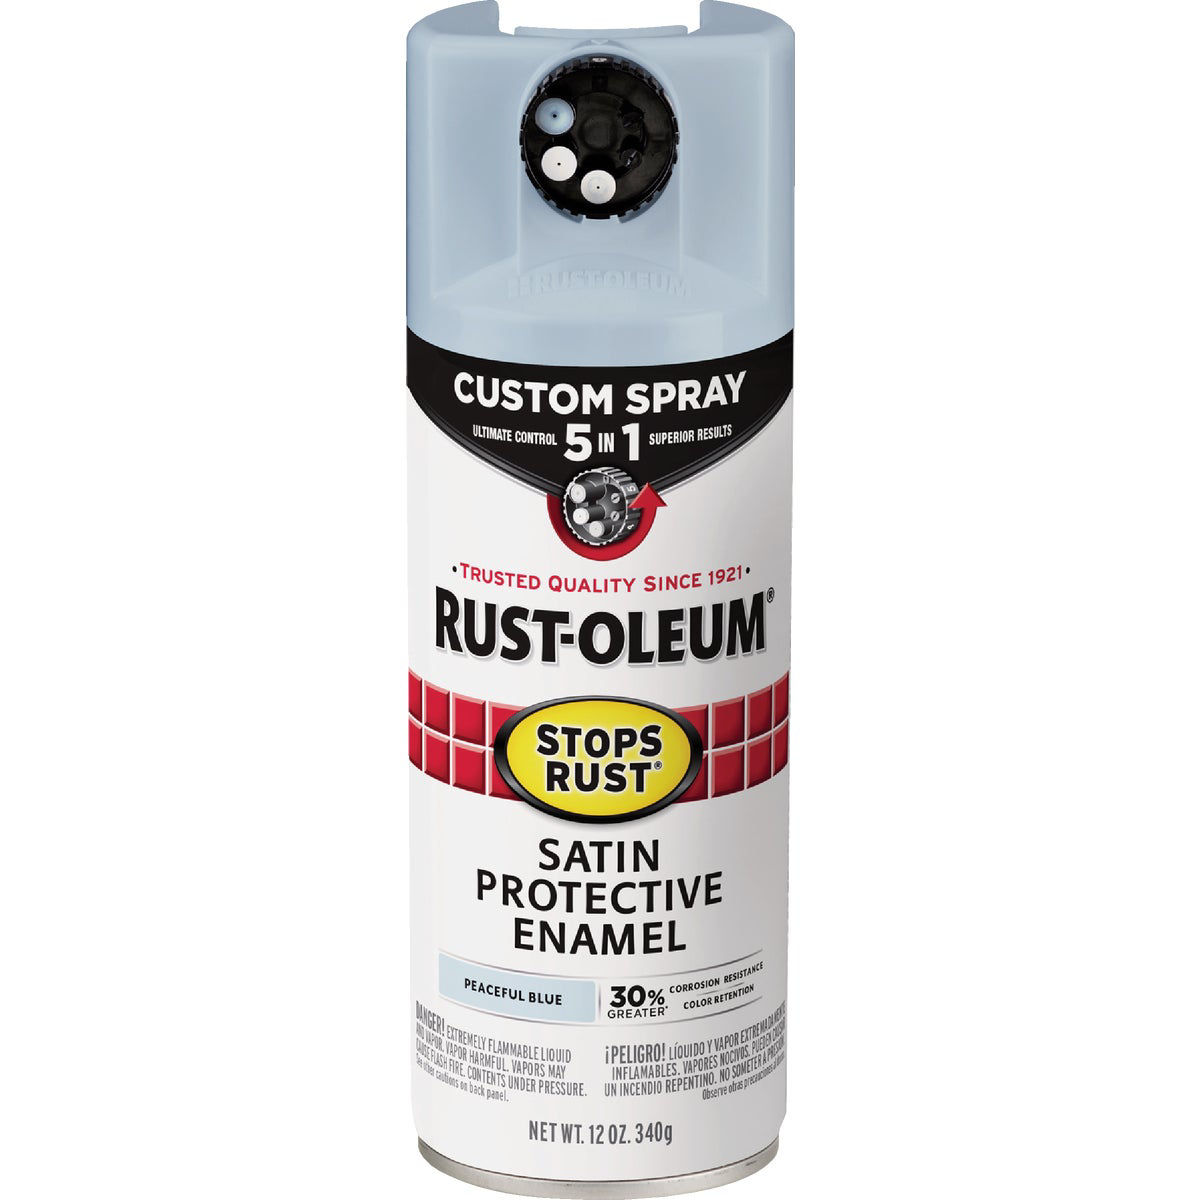 Dulux Medium Grey Precisely Matched For Paint and Spray Paint